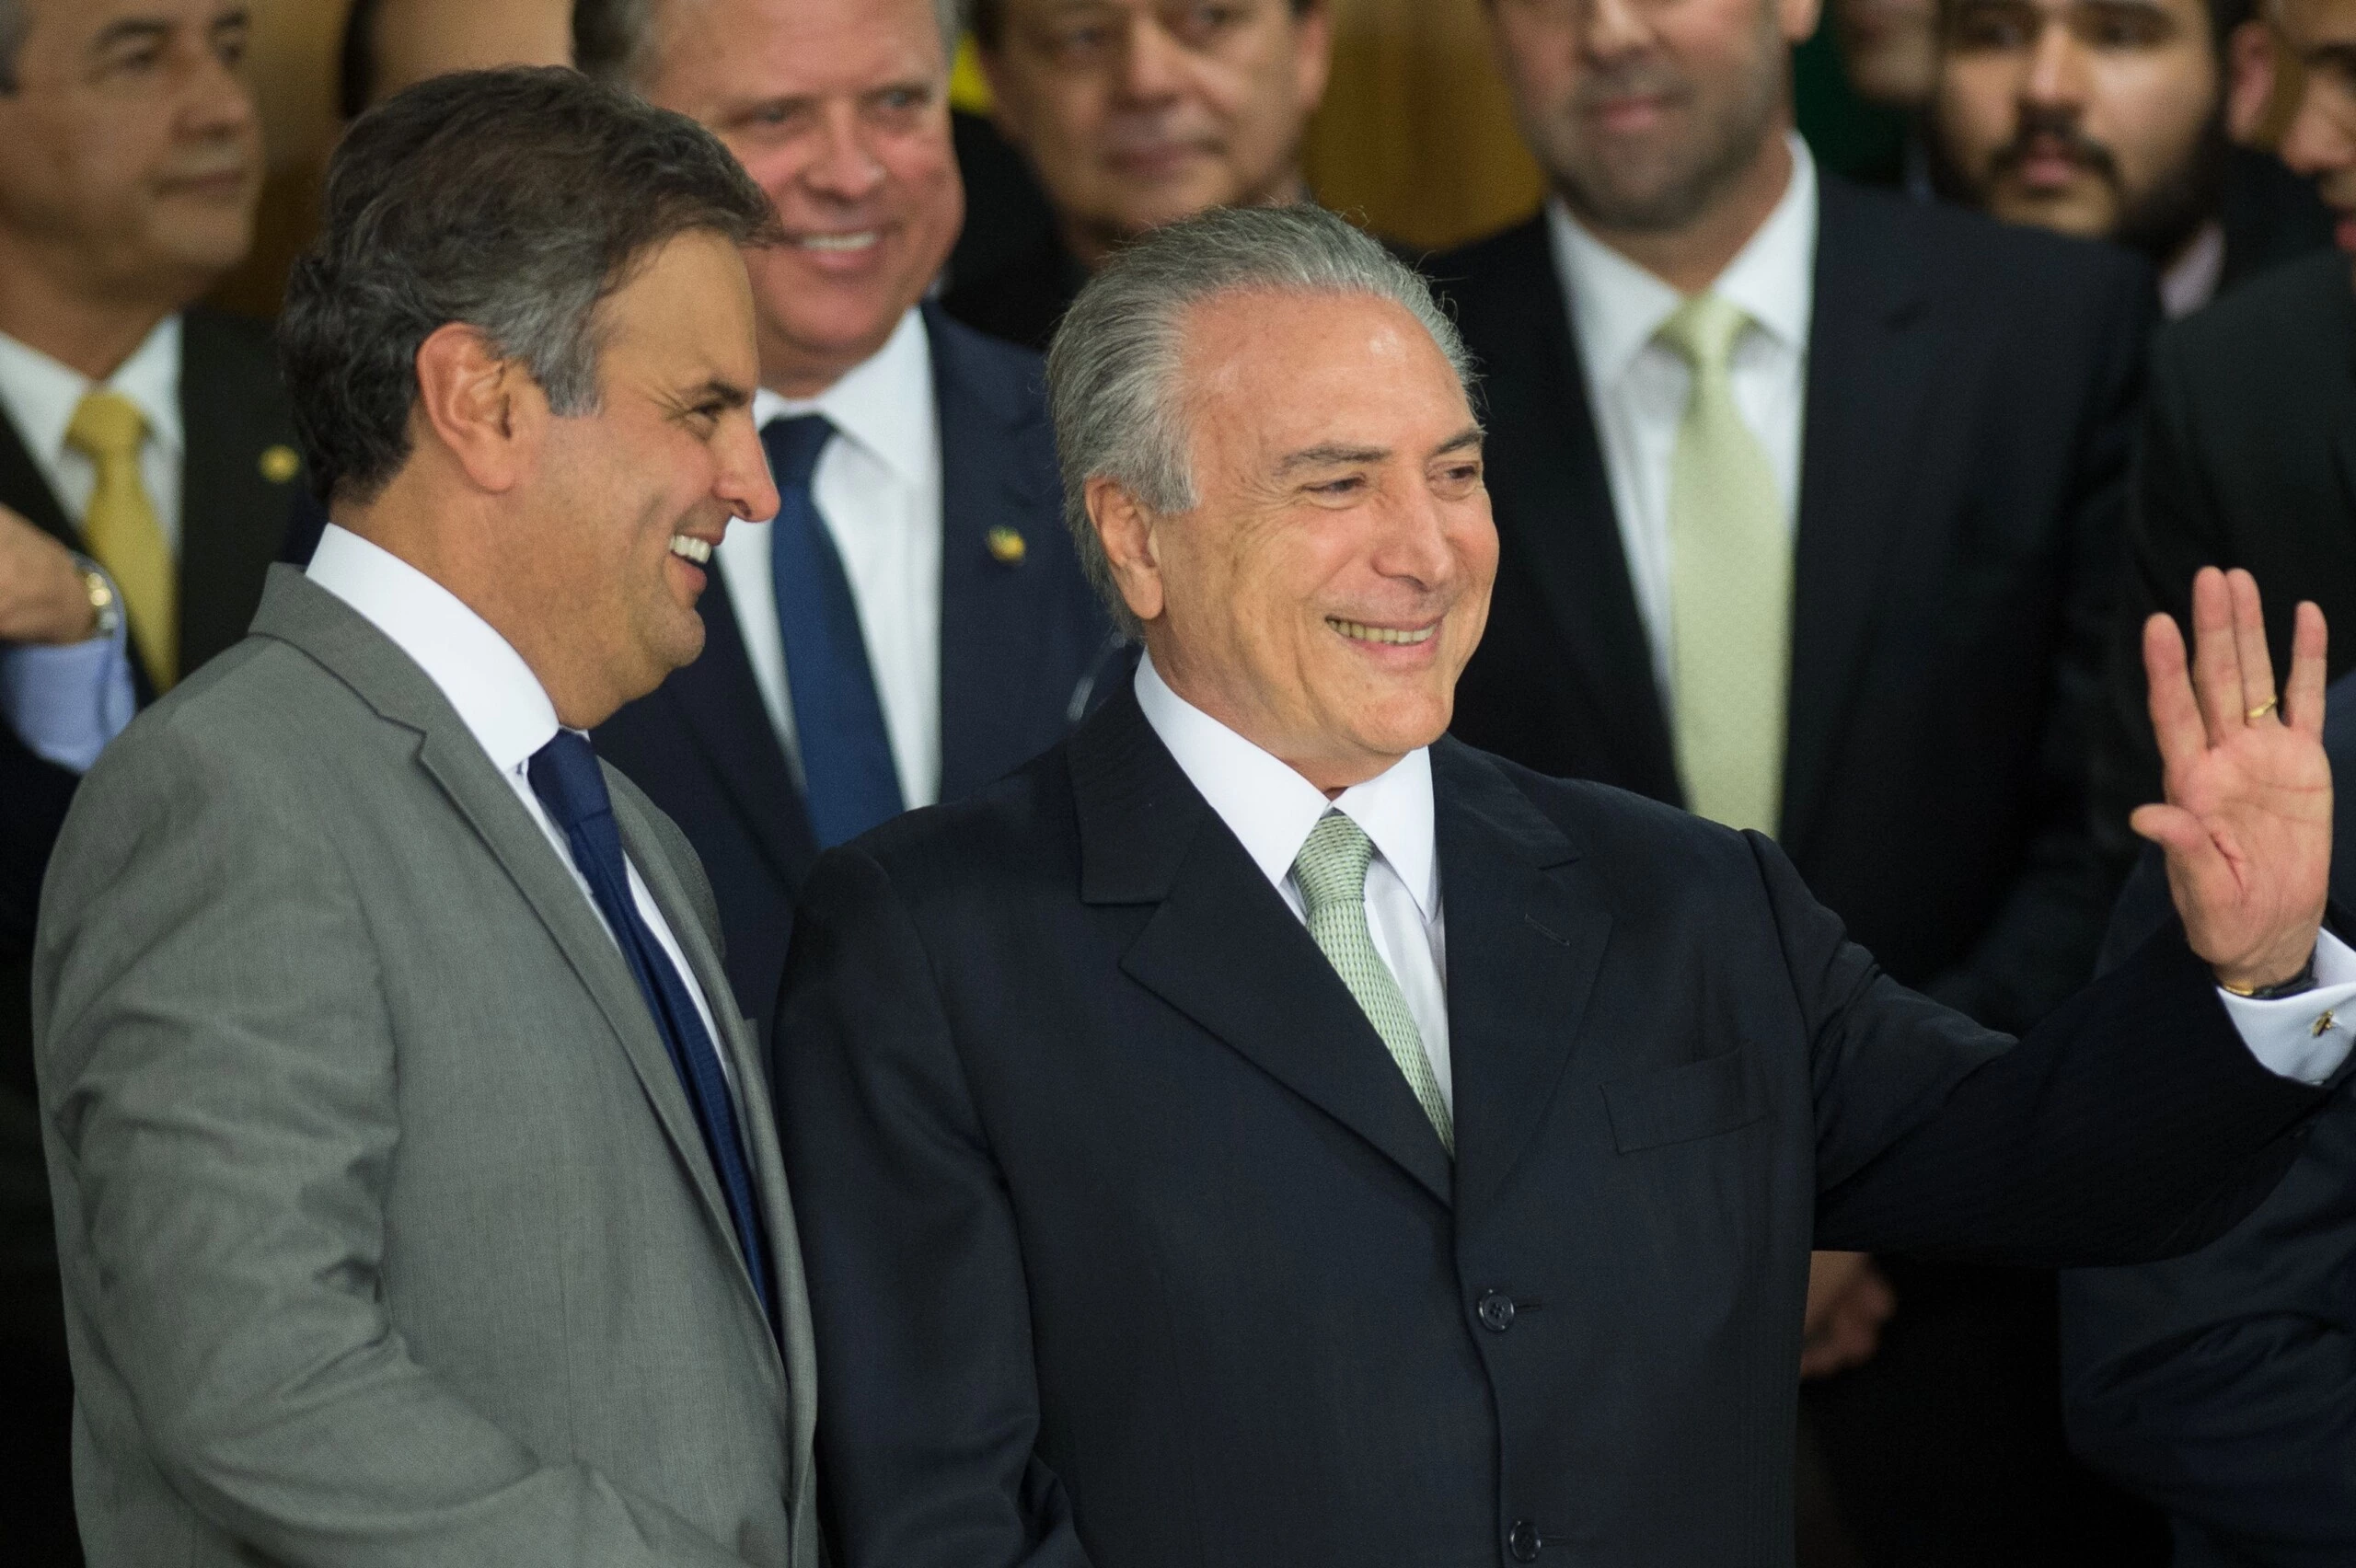 Brazilian acting President Michel Temer (R) and Senator Aecio Neves during the new ministers inauguration ceremony at Planalto palace in Brasilia, on May 12, 2016. Temer said Thursday his new cabinet must work to restore the country's "credibility," in his first address after assuming power from suspended predecessor Dilma Rousseff pending her impeachment trial. / AFP / ANDRESSA ANHOLETE        (Photo credit should read ANDRESSA ANHOLETE/AFP/Getty Images)